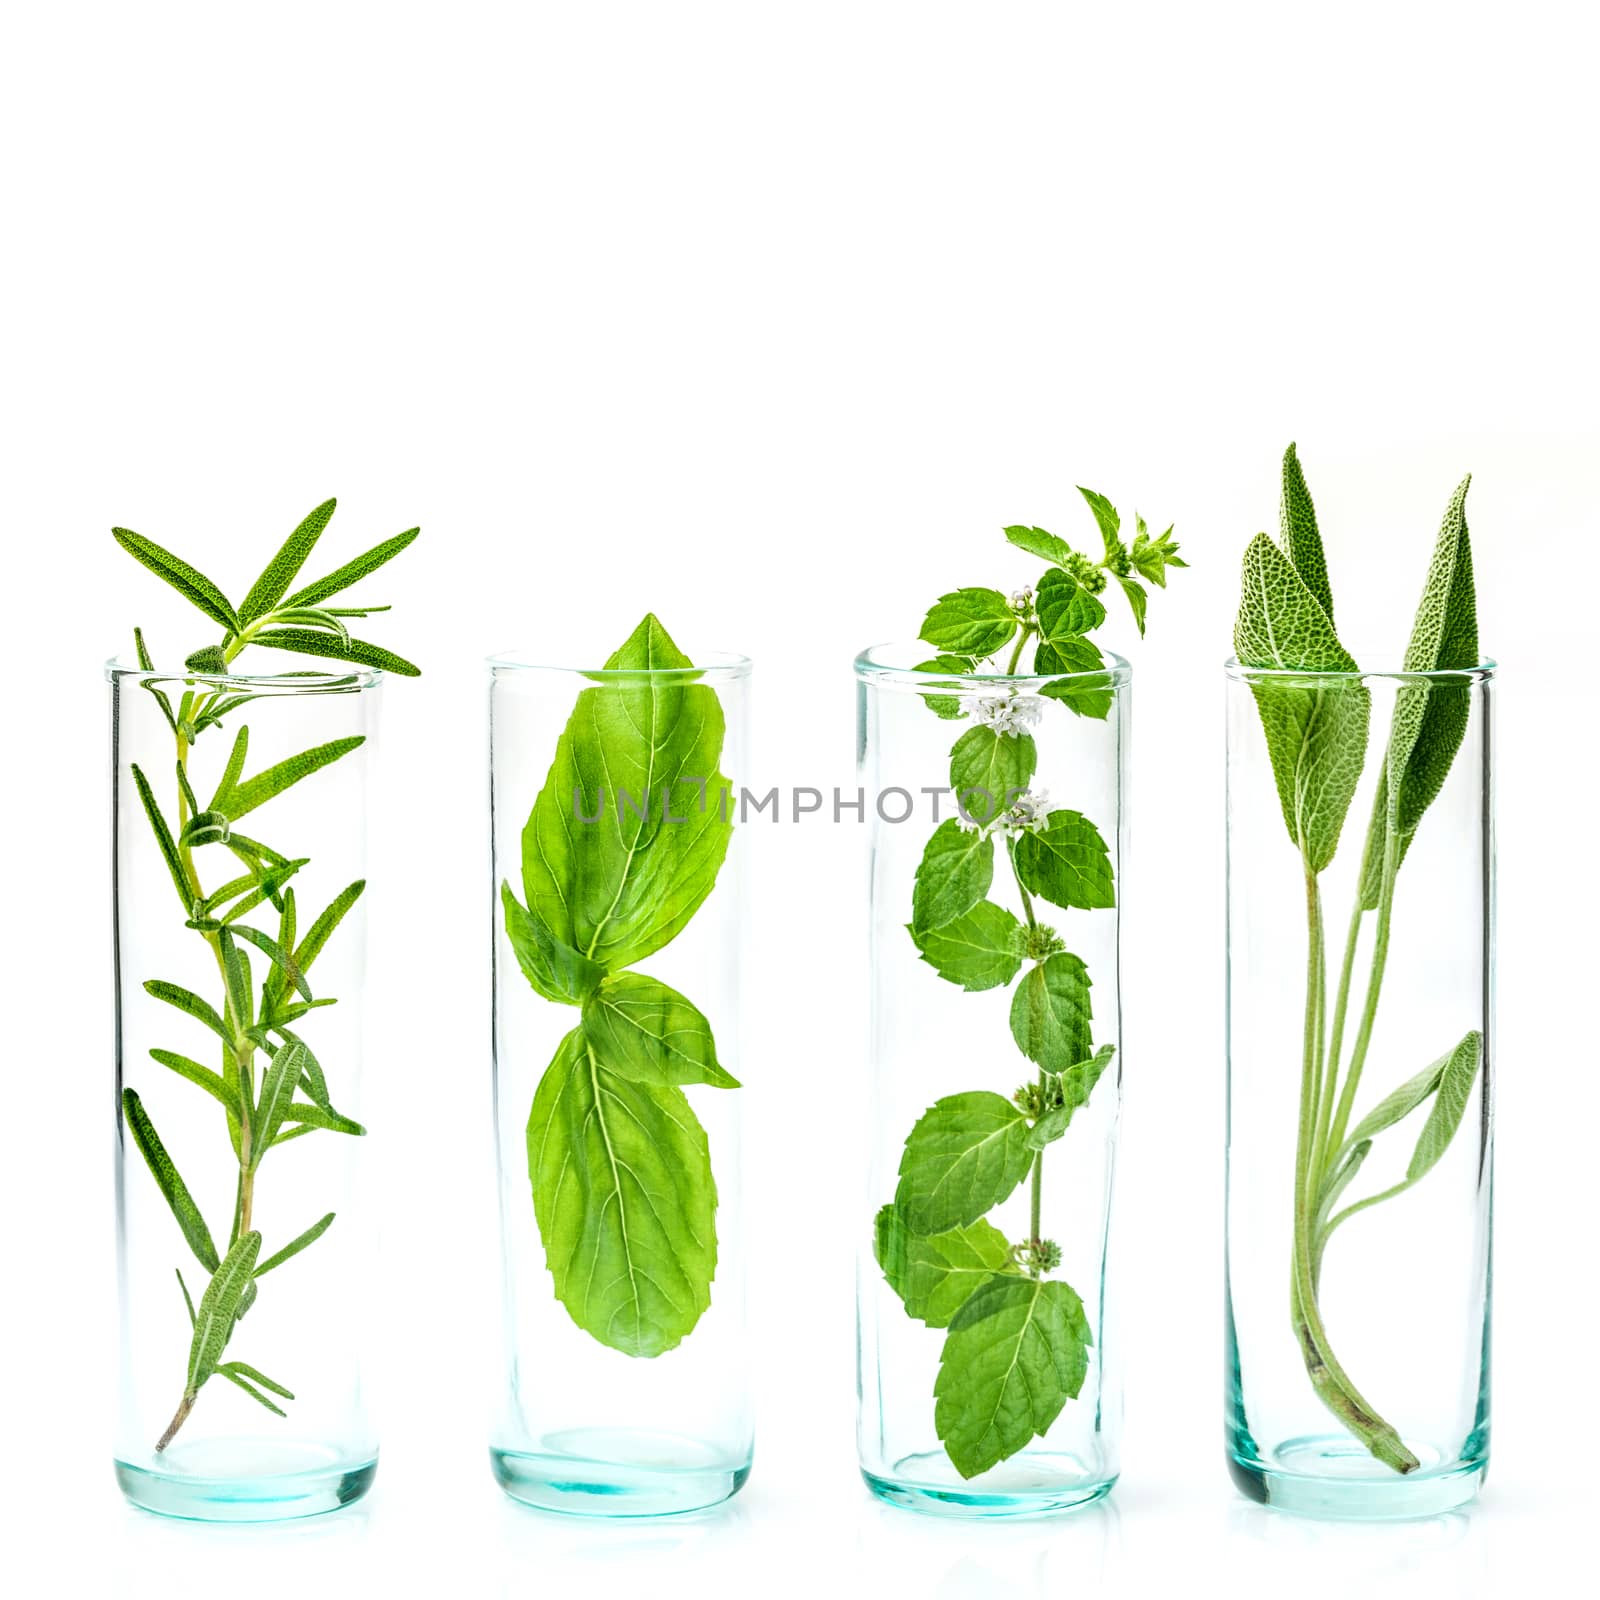 Close Up bottles of essential oils with fresh herbs . Sage, rosemary, sweet basil leaves and peppermint branch isolated on white background.